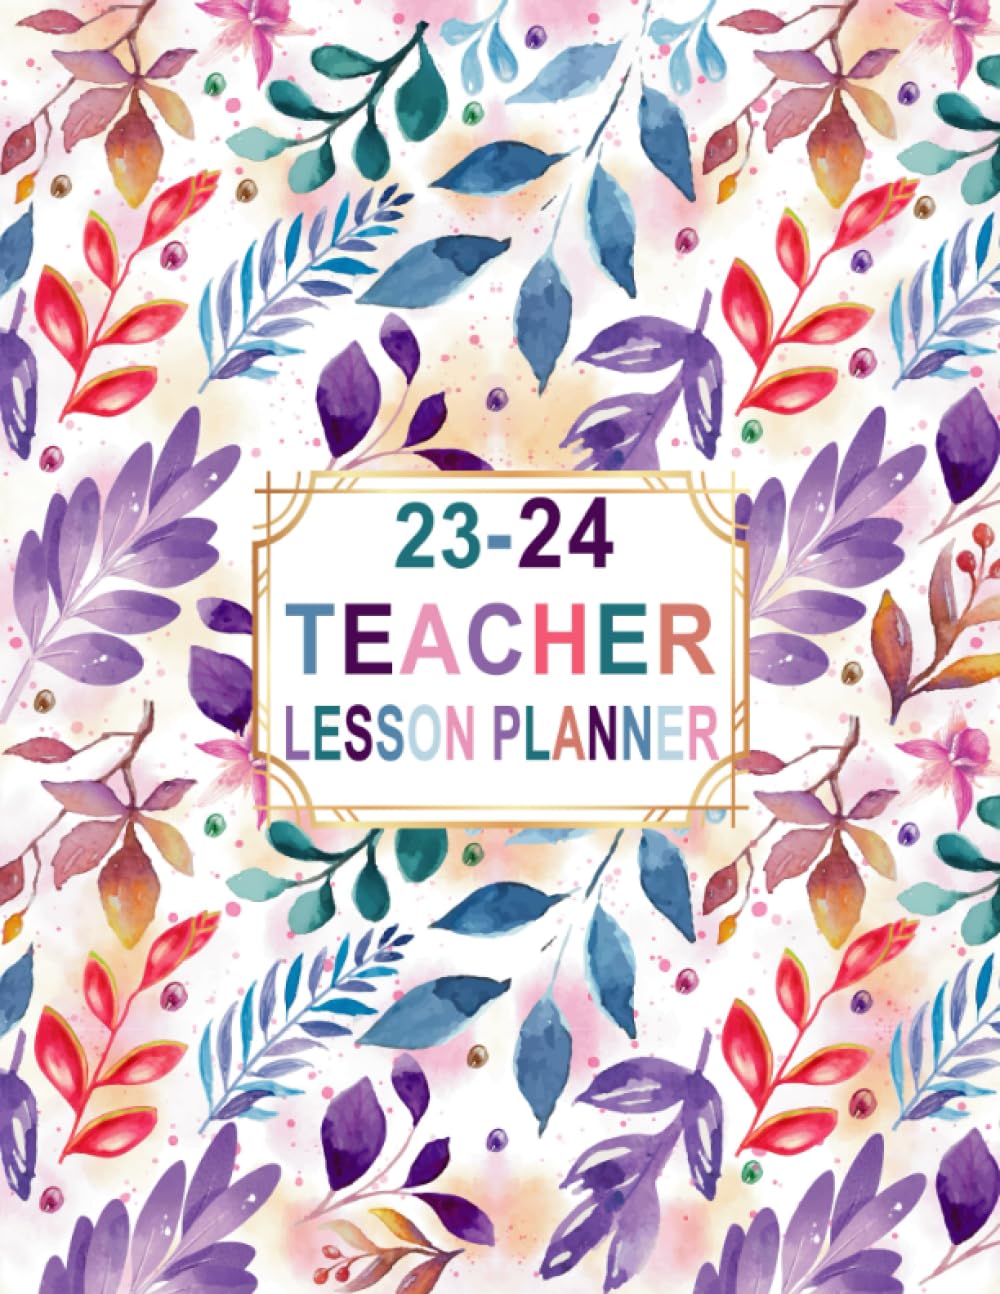 23-24 Teacher Lesson Planner: Secondary Teacher Lesson Plan Book and Classroom Management, Golden and Floral Cover For Women